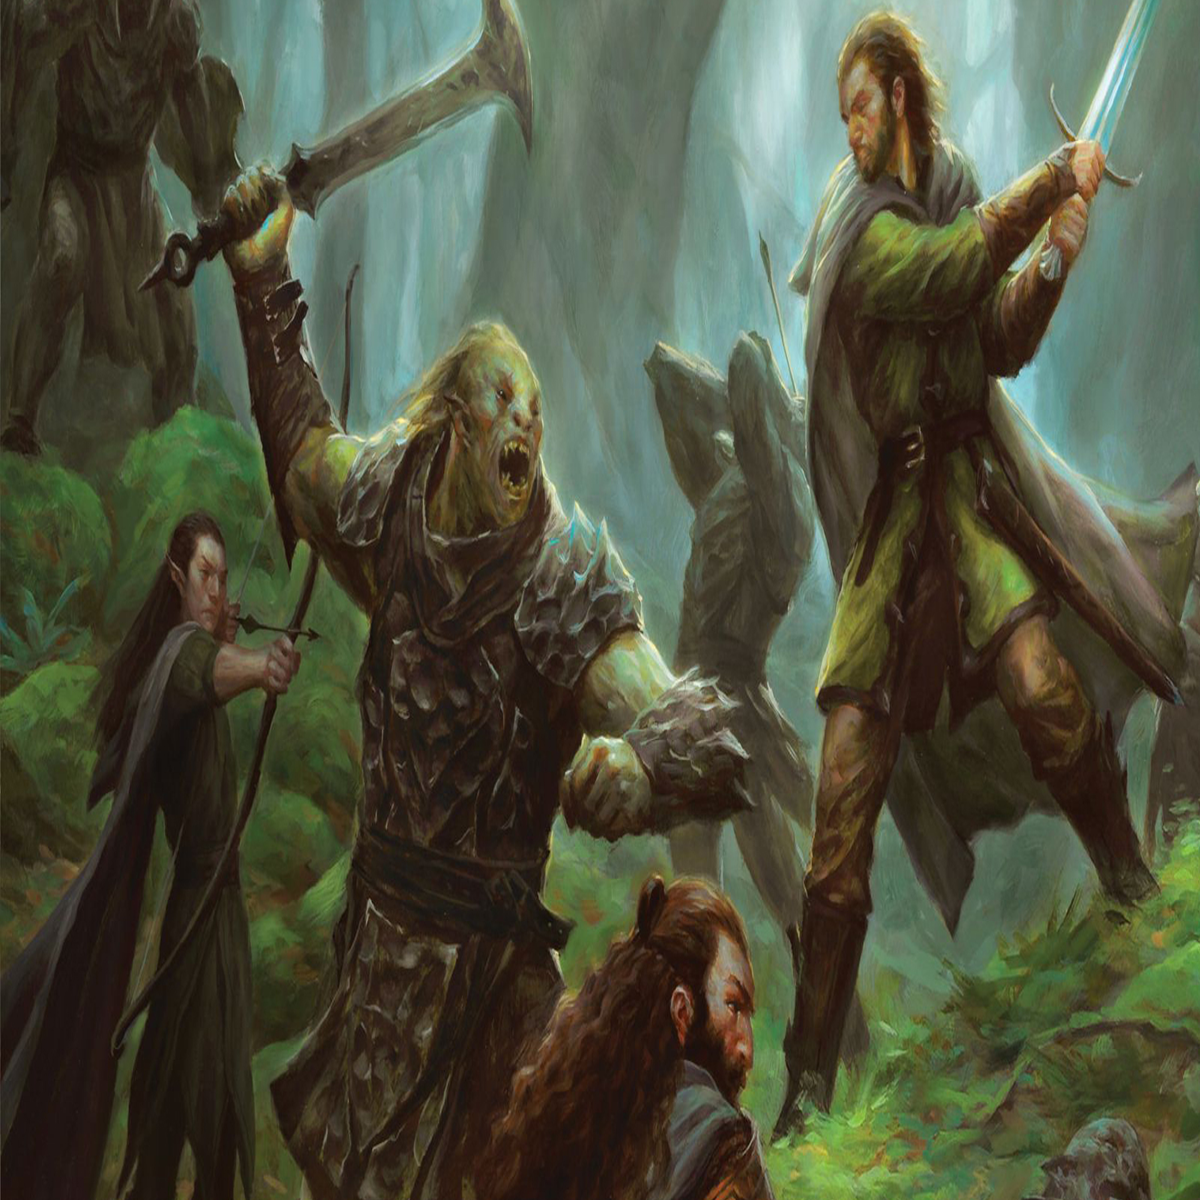 The Lord of the Rings: The Fellowship of the Ring (video game